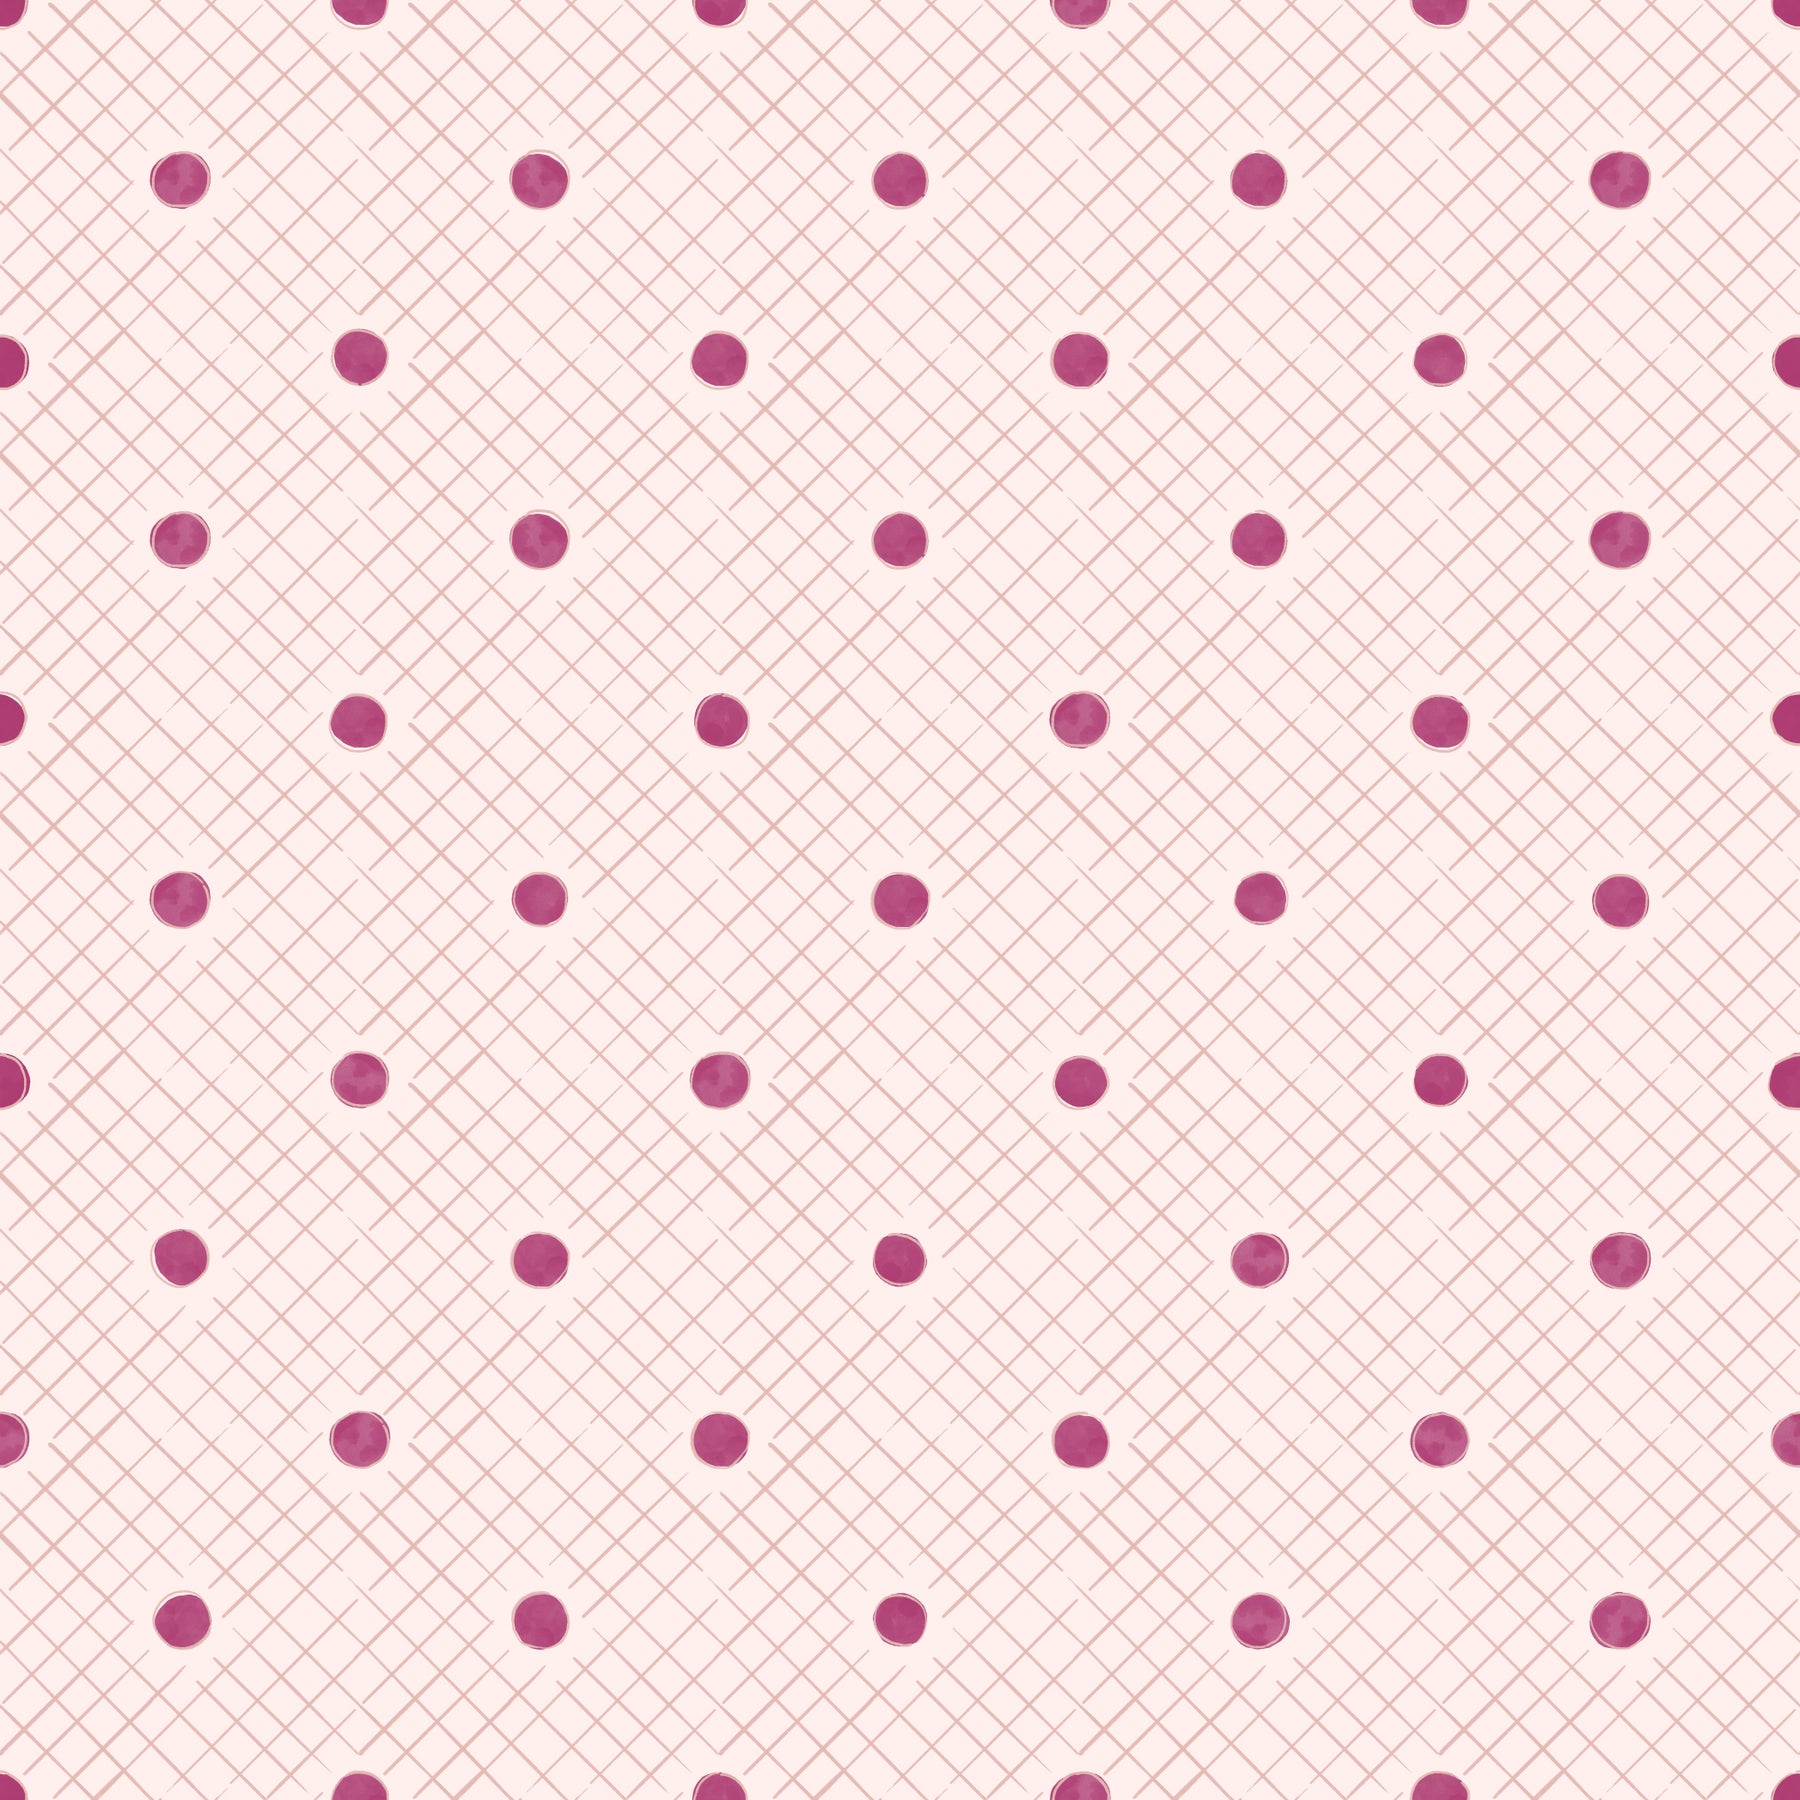 Dotted Swiss - pink dots on white